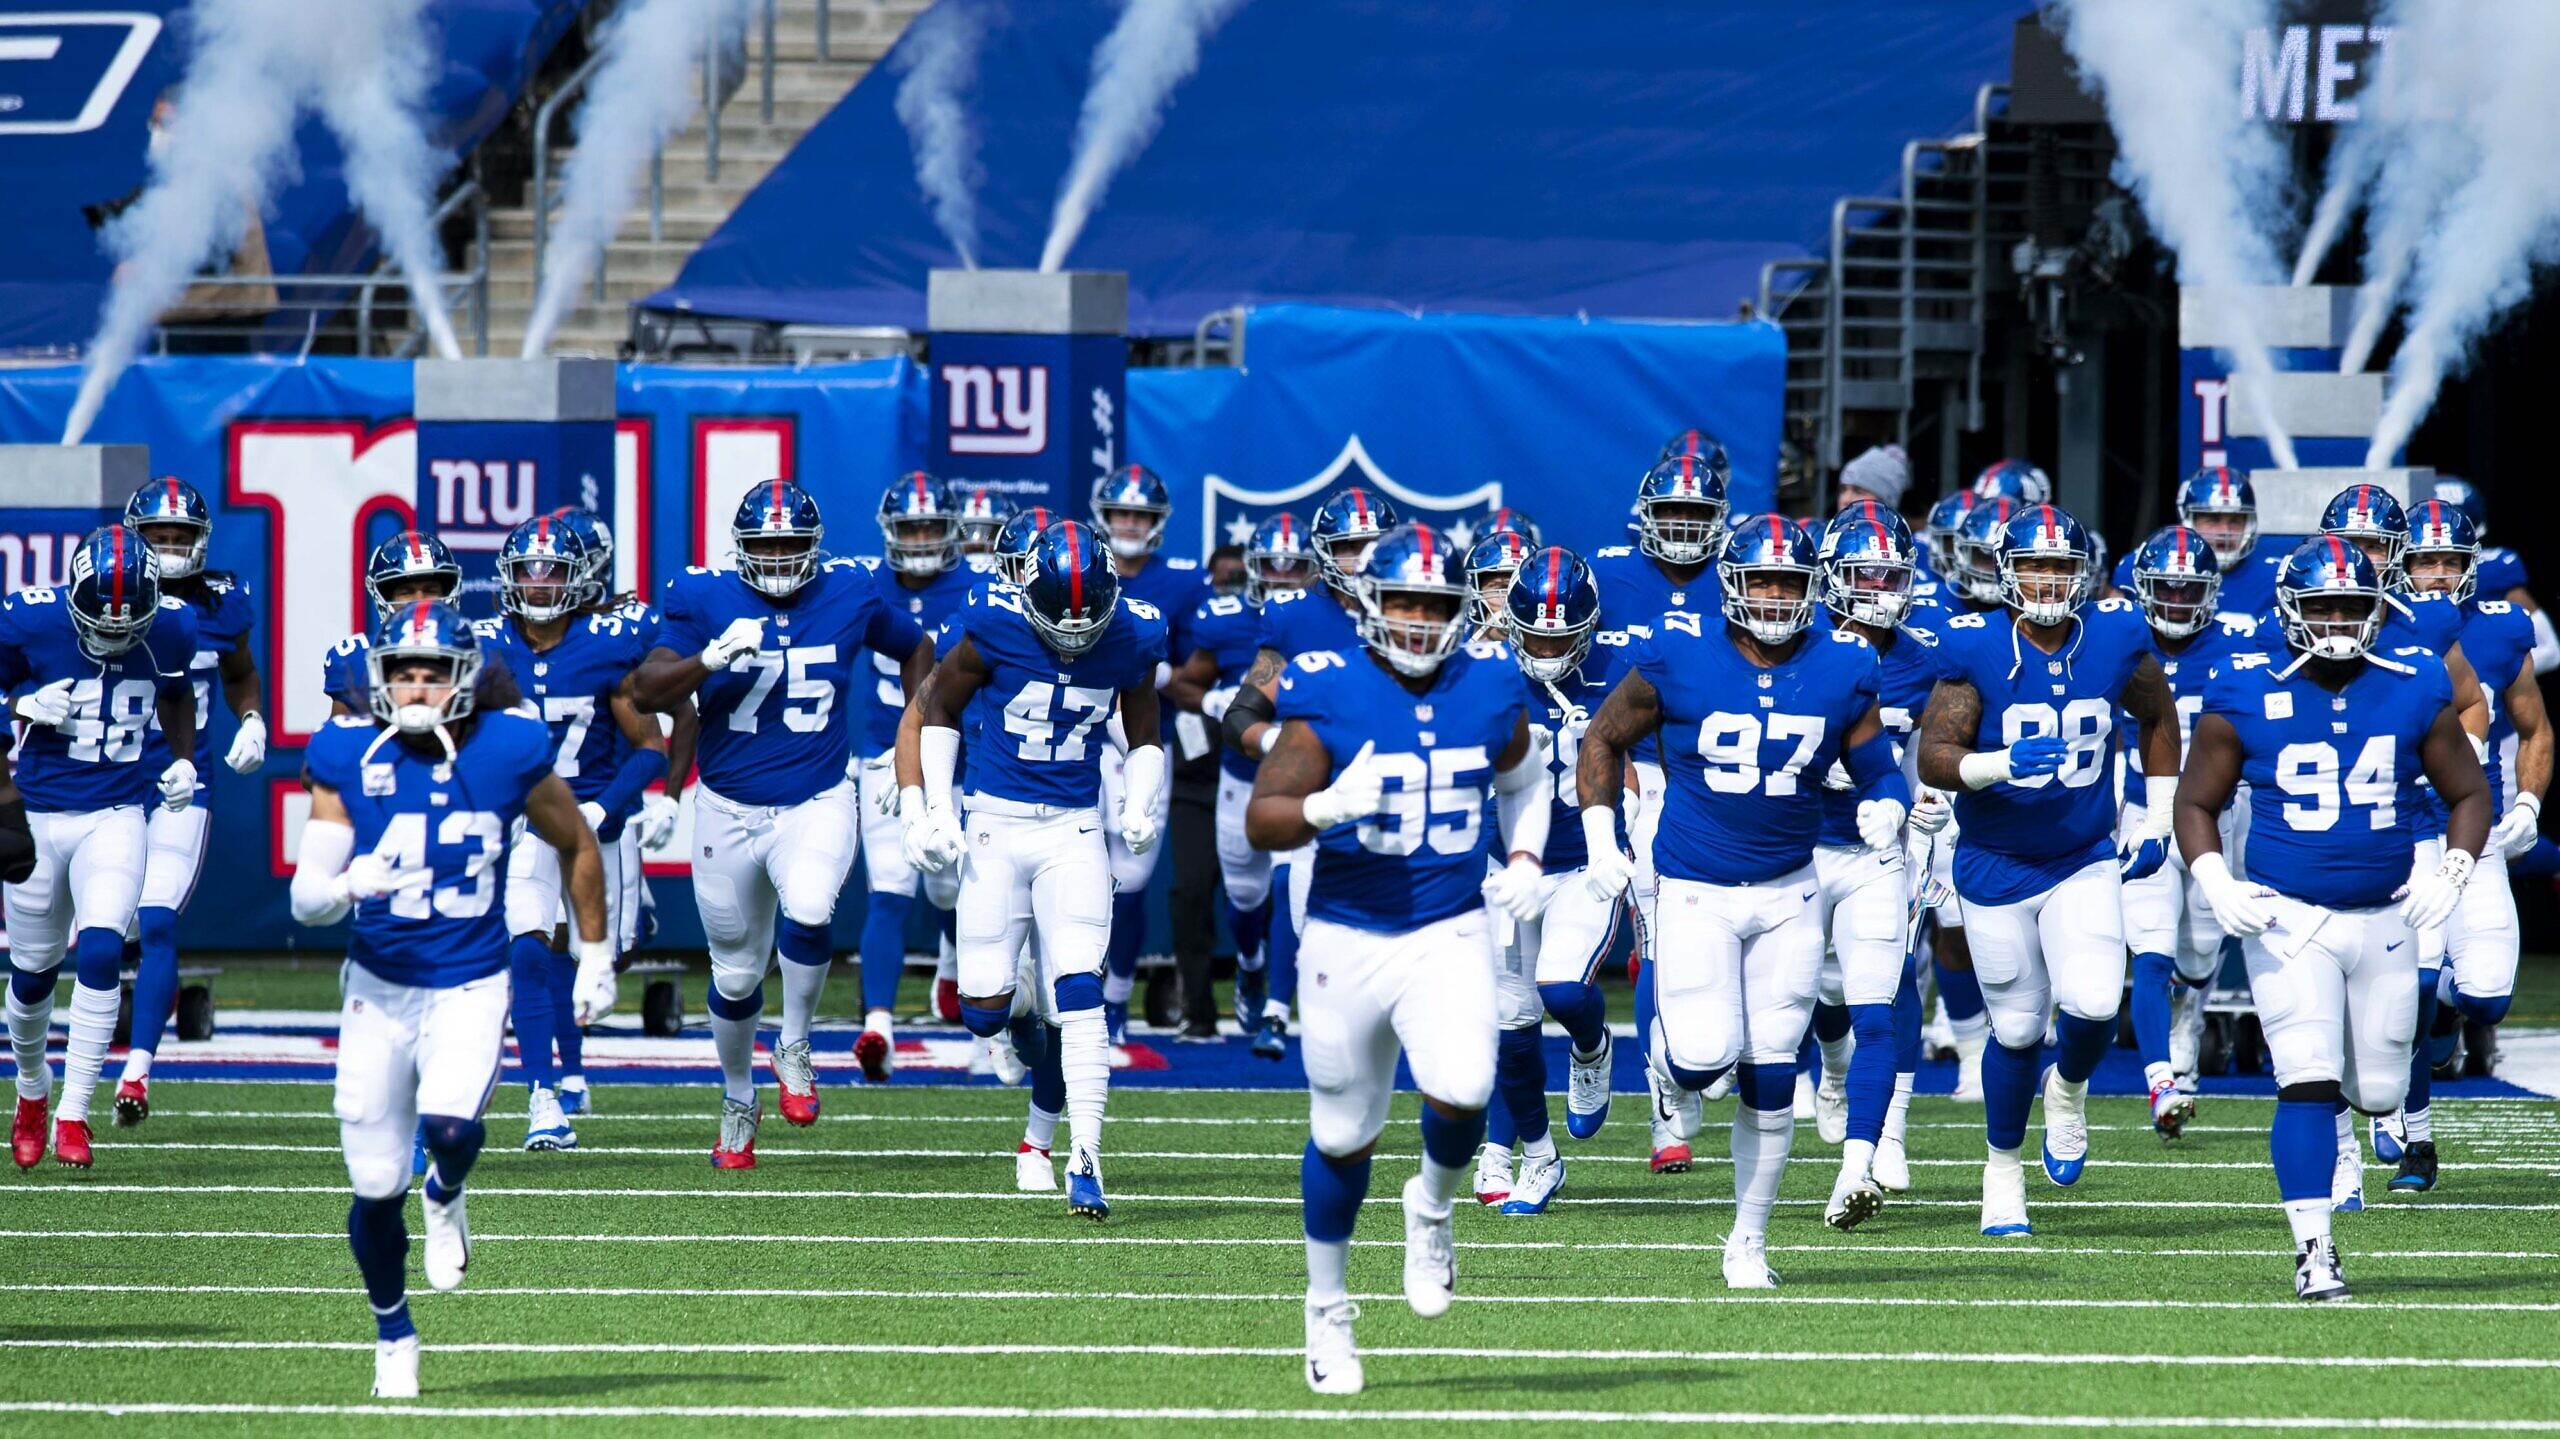 Owner of New York Giants unhappy with football game on Rosh Hashanah 